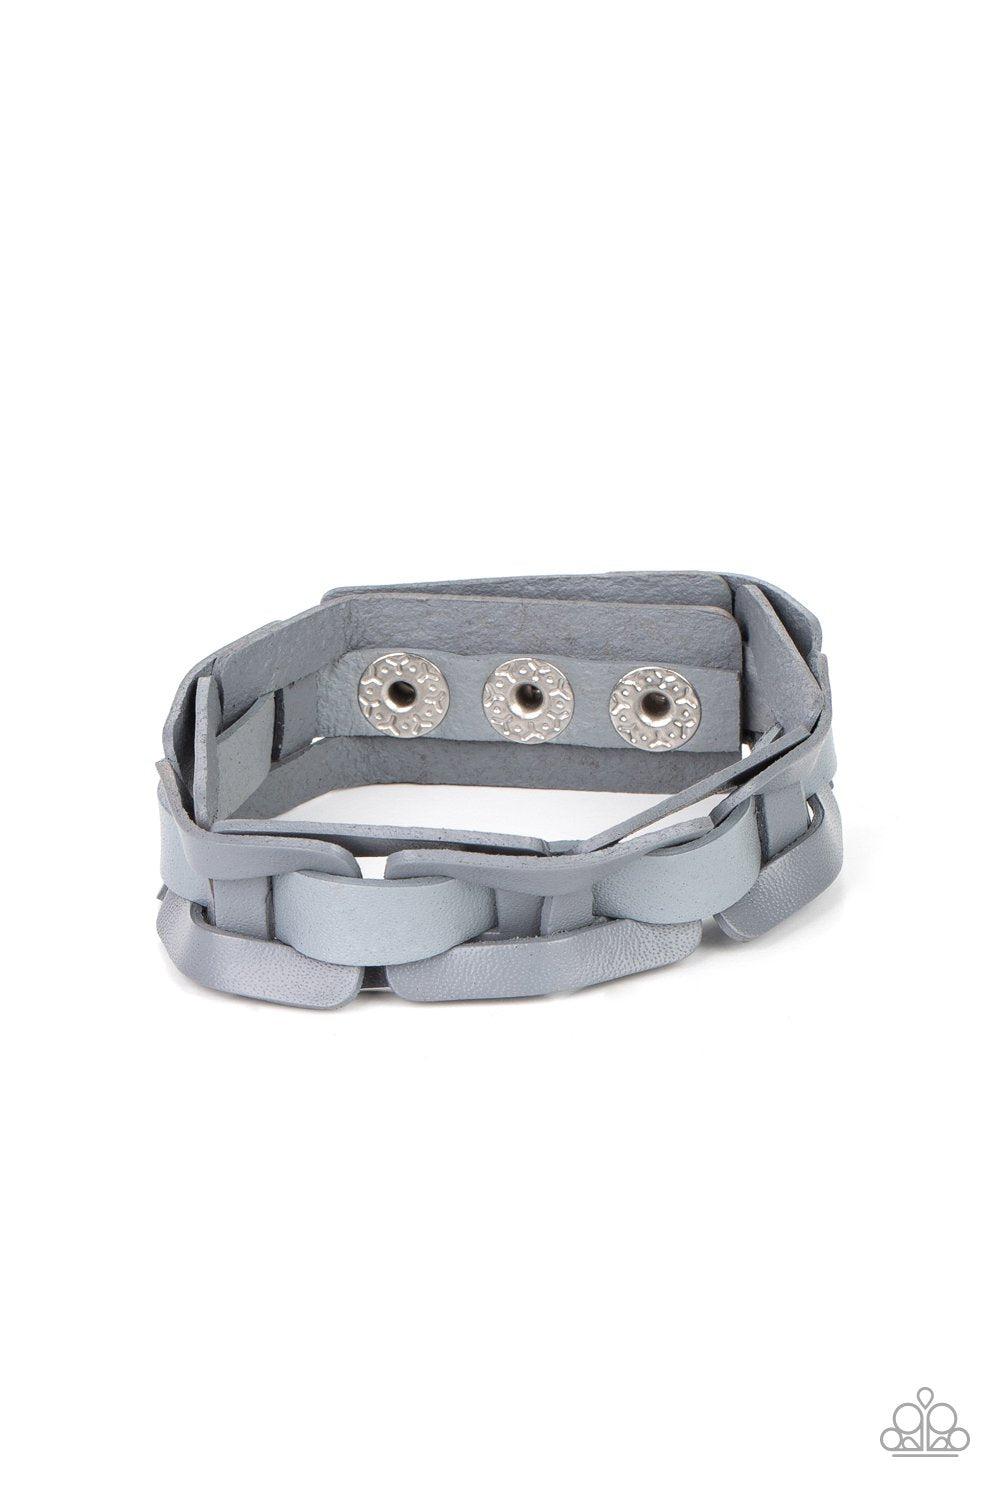 Garage Band Grunge Silver Leather Wrap Snap Bracelet - Paparazzi Accessories- lightbox - CarasShop.com - $5 Jewelry by Cara Jewels